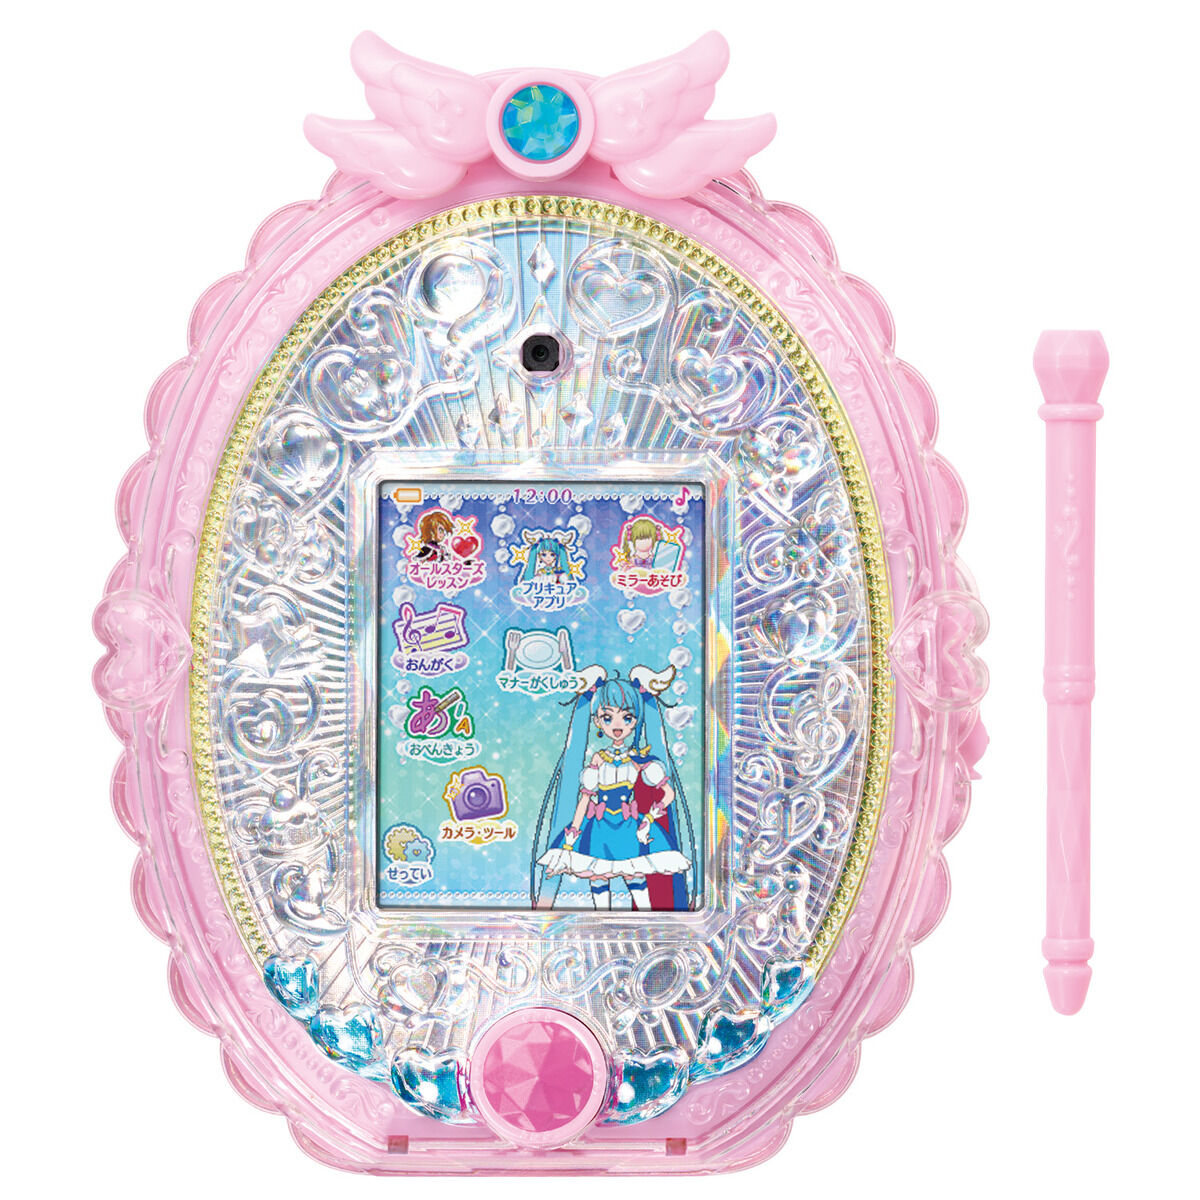 Precure All Stars Cards  Anime toys, Pretty cure, Star cards